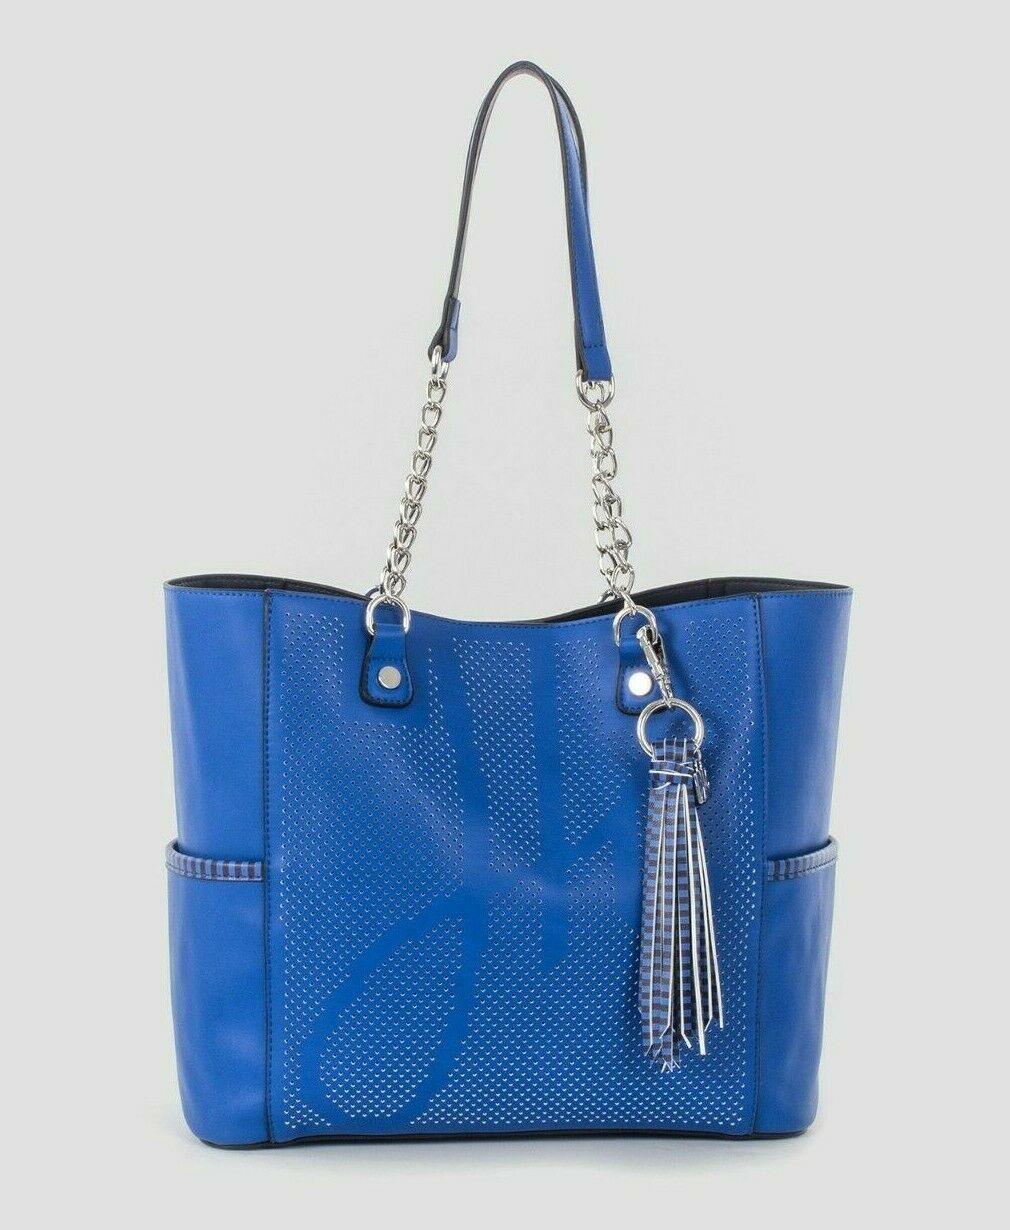 JOSEPH RIBKOFF Valencia Cobalt Blue Faux Leather Tote Bag Chain Handle 191956 - SVNYFancy